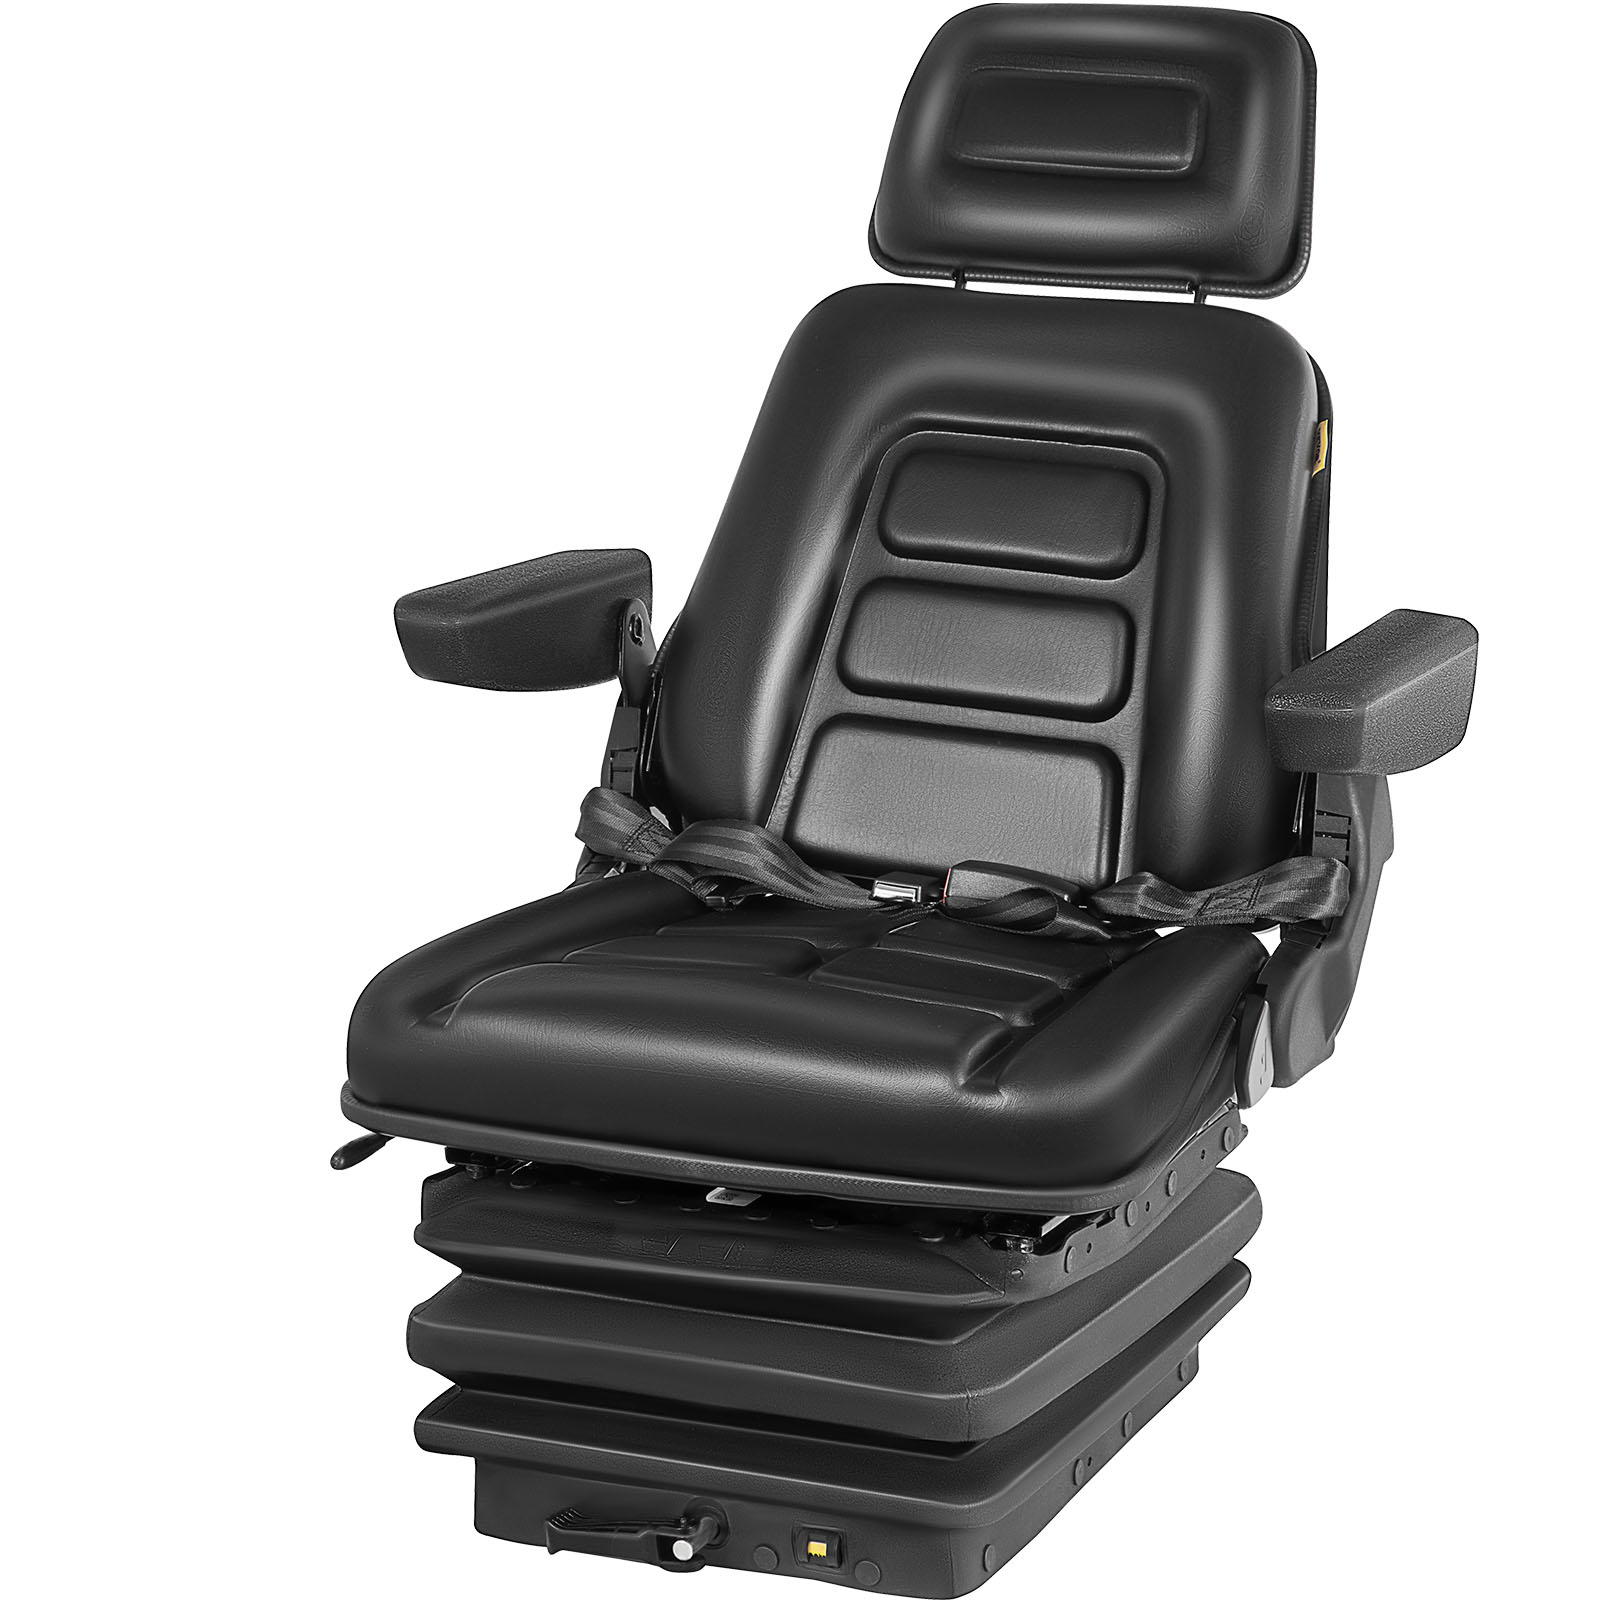 https://d2qc09rl1gfuof.cloudfront.net/product/TYXXGZY0000000001/tractor-seat-m100-1.2.jpg